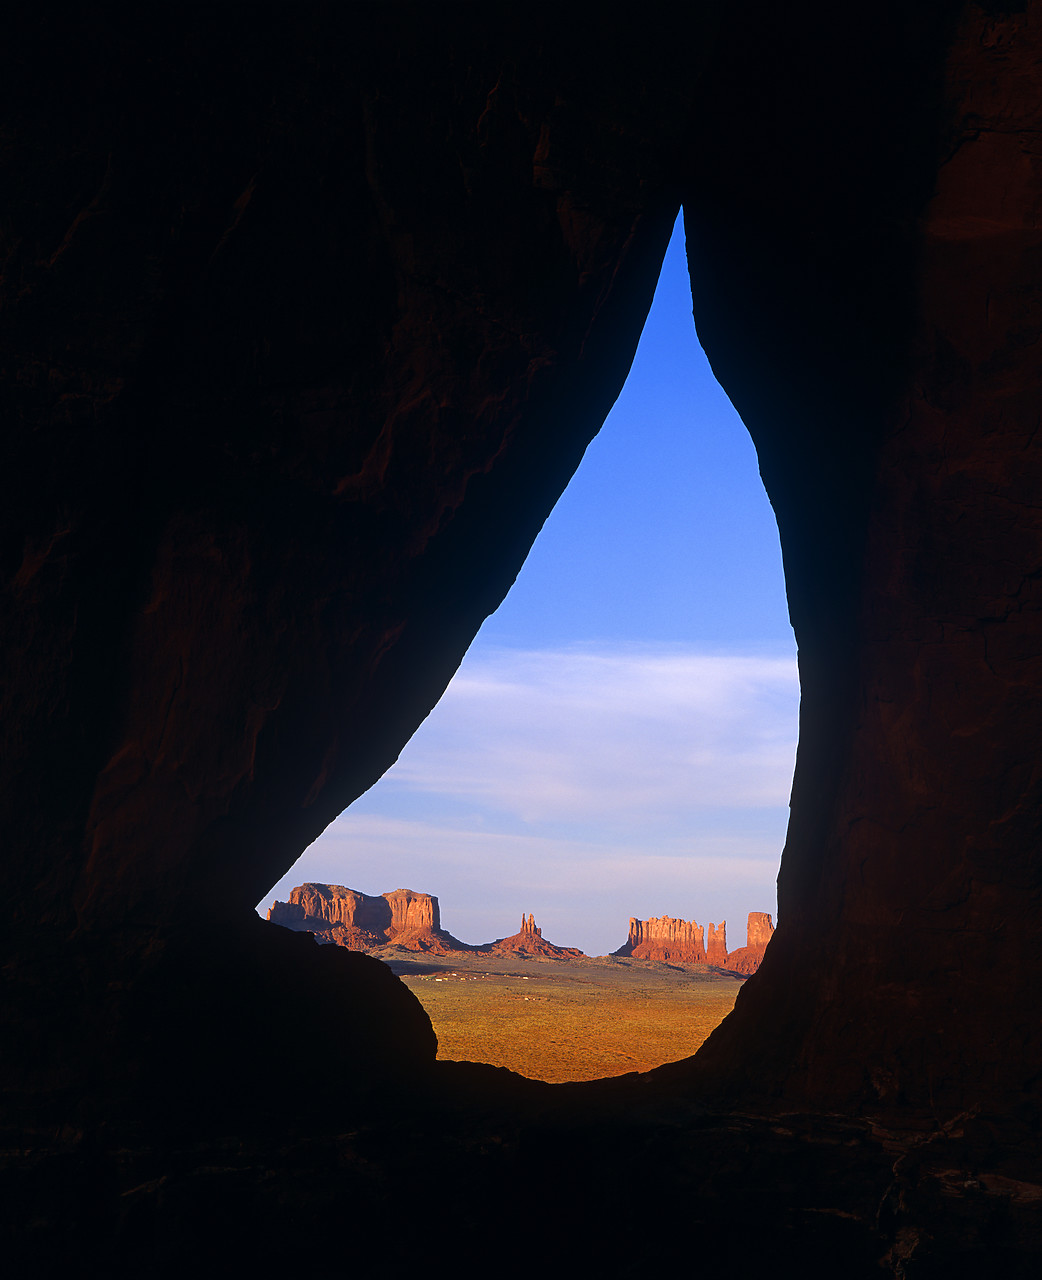 #010814-1 - Teardrop Arch in Silhouette, Monument Valley, Arizona, USA